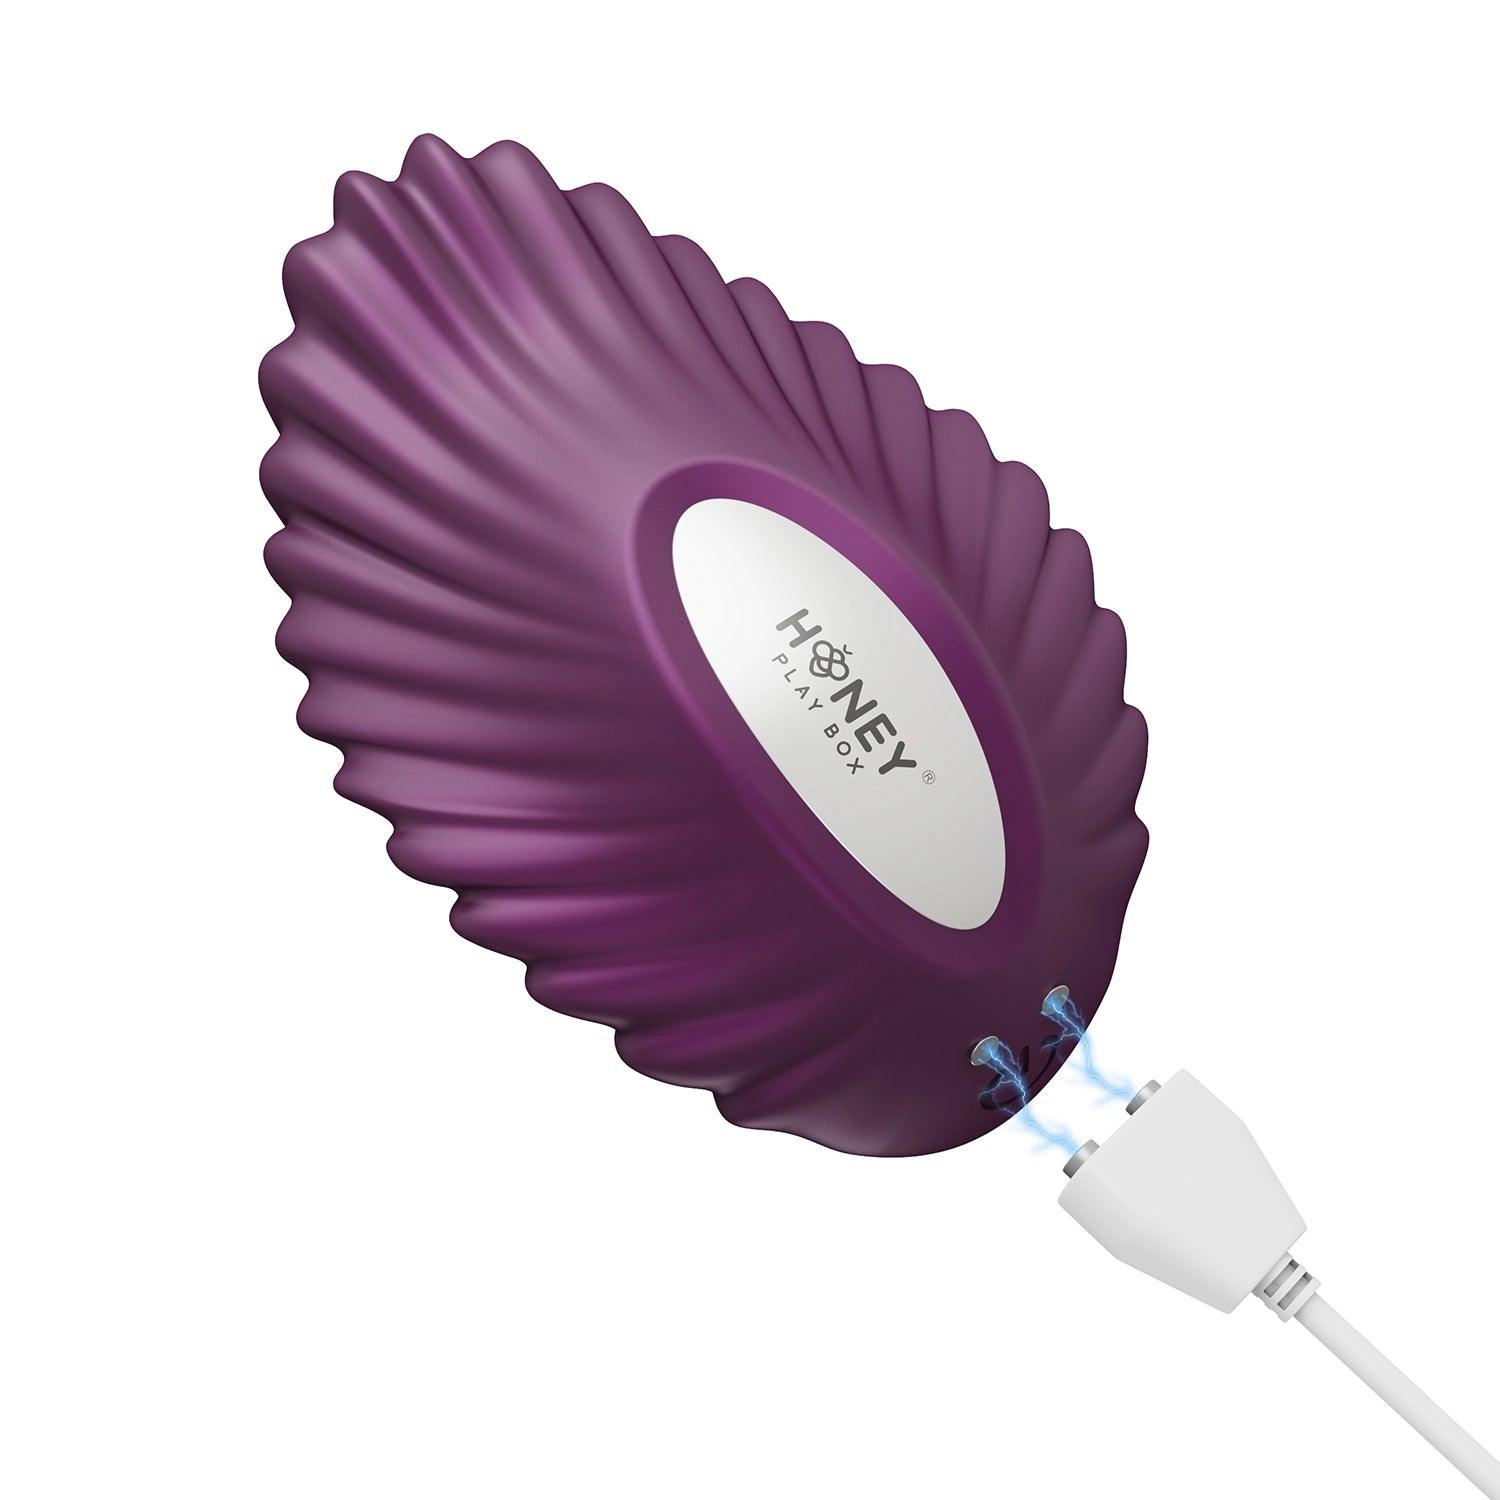 Pearl vibrator with app control